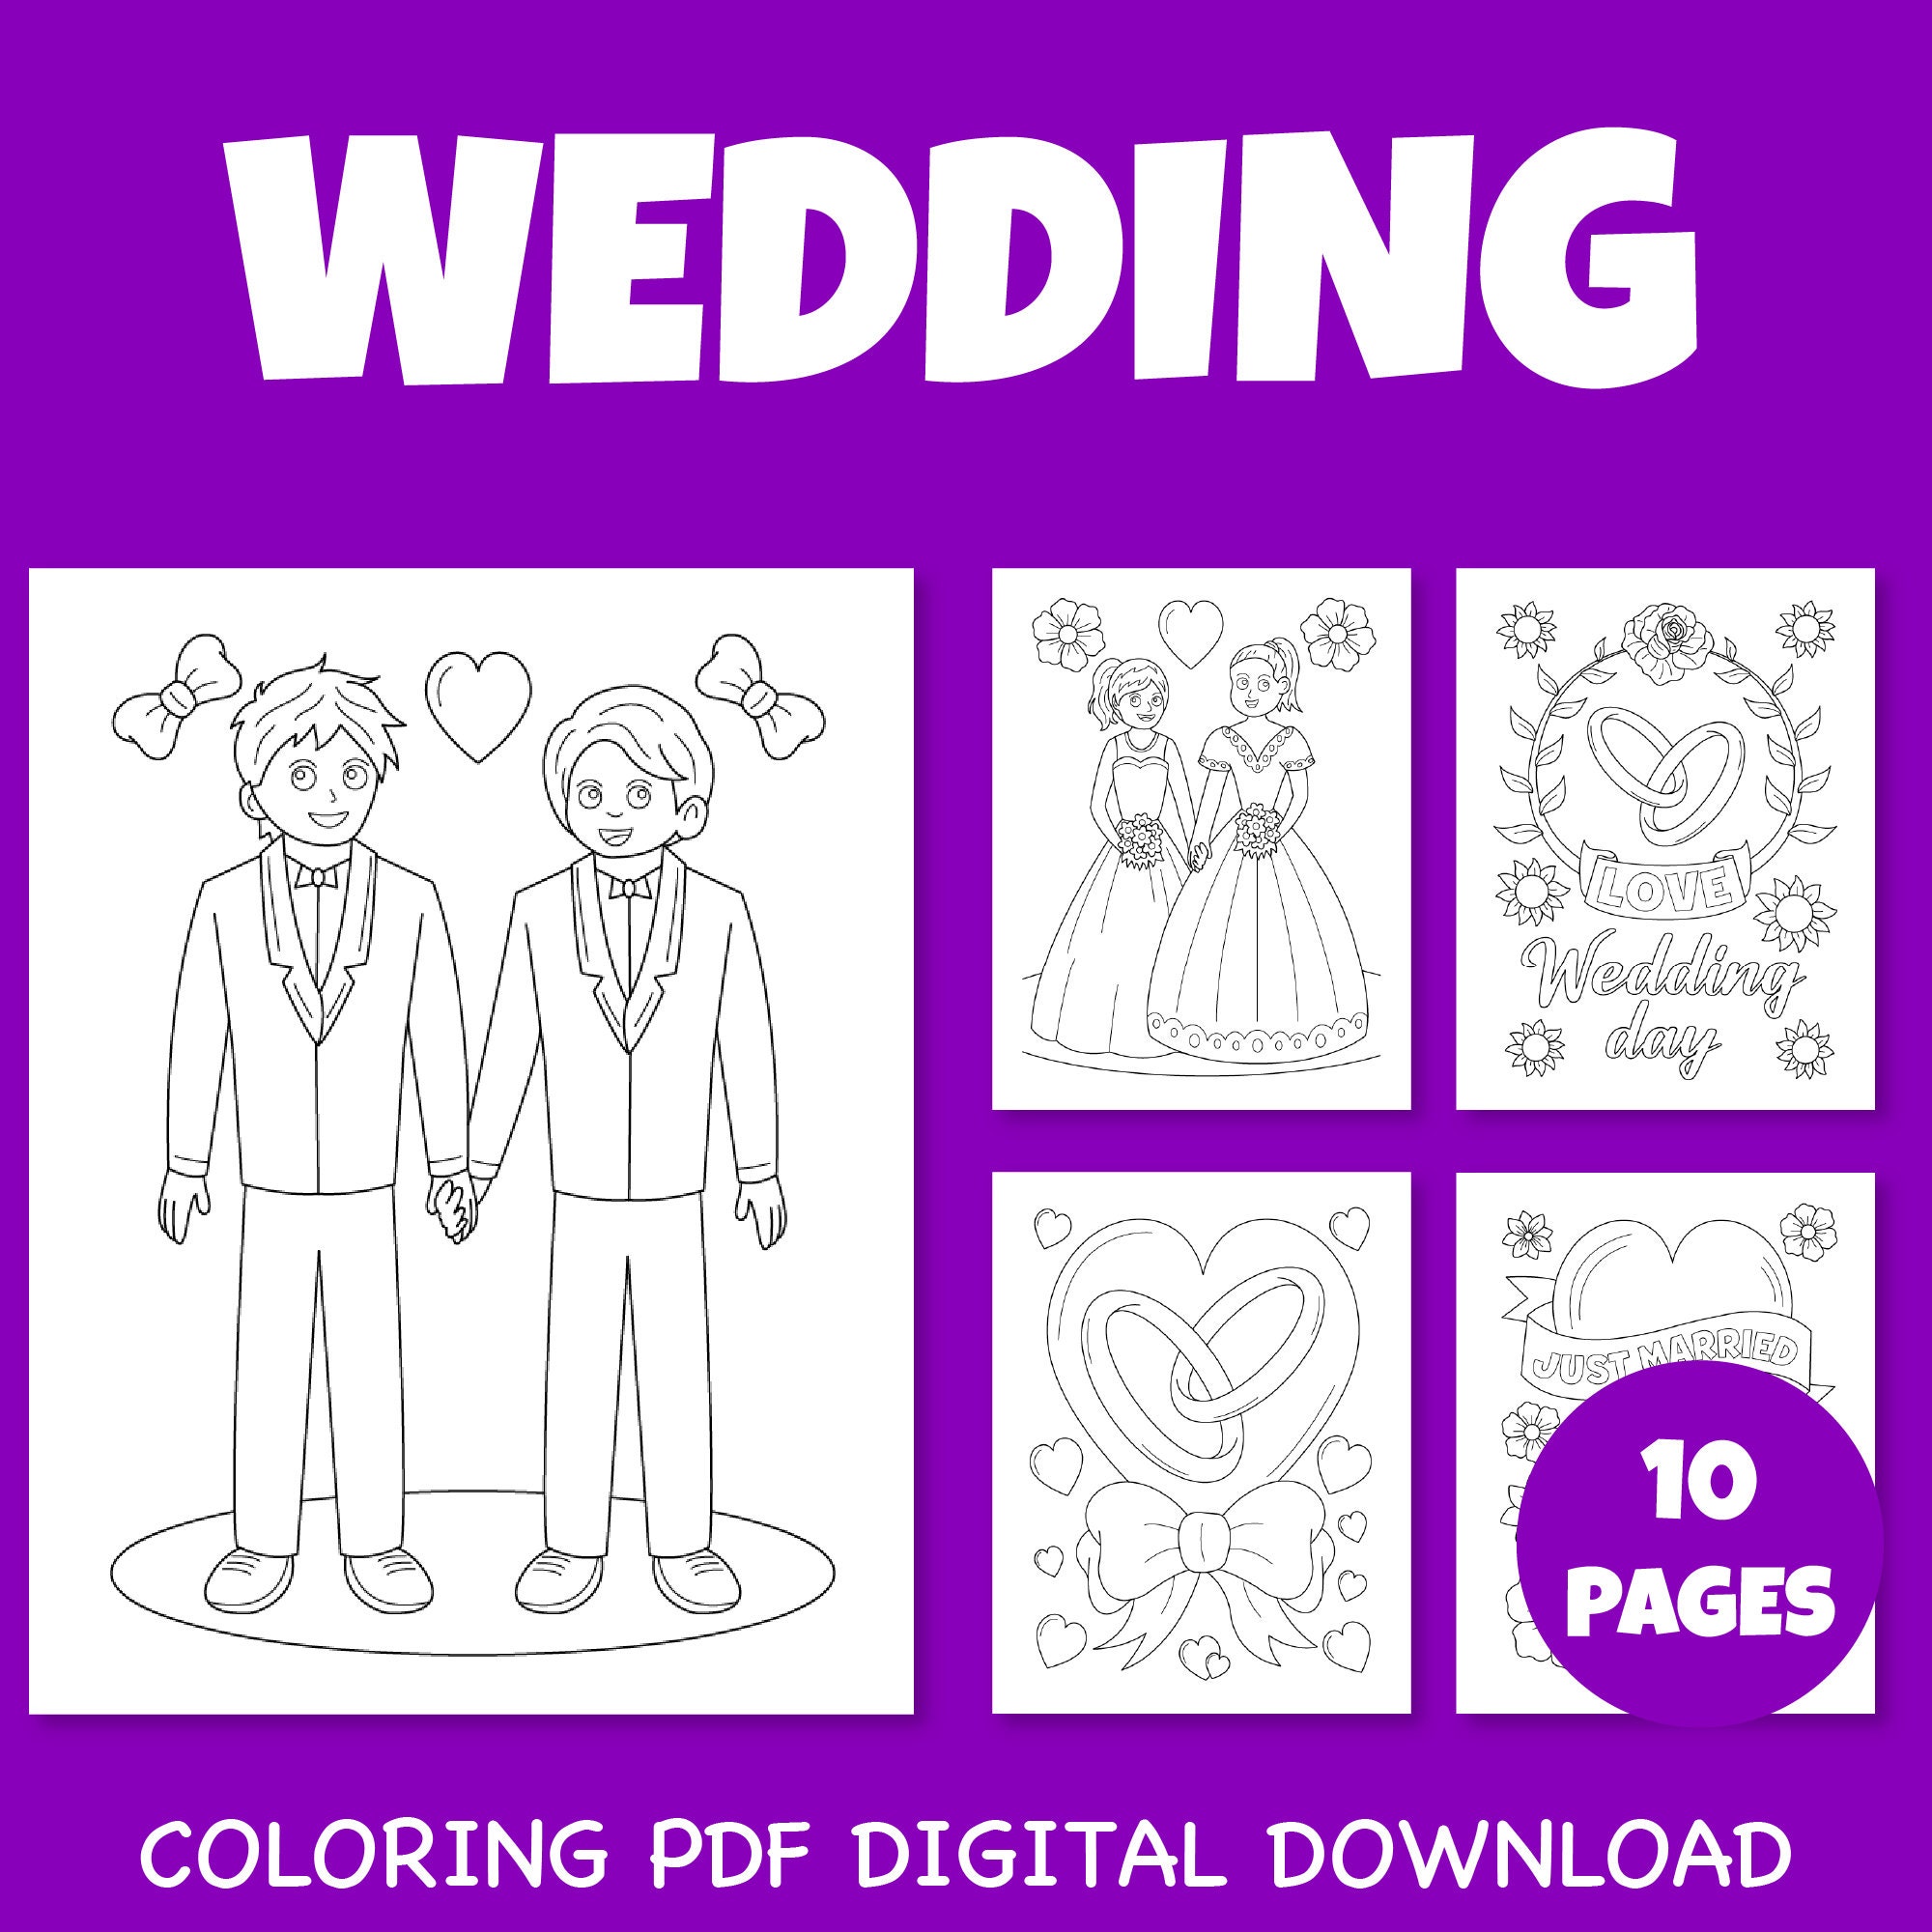 Personalized Same sex wedding activity coloring book wedding favor Kids 8.5  x 11 PDF or JPEG TEMPLATE